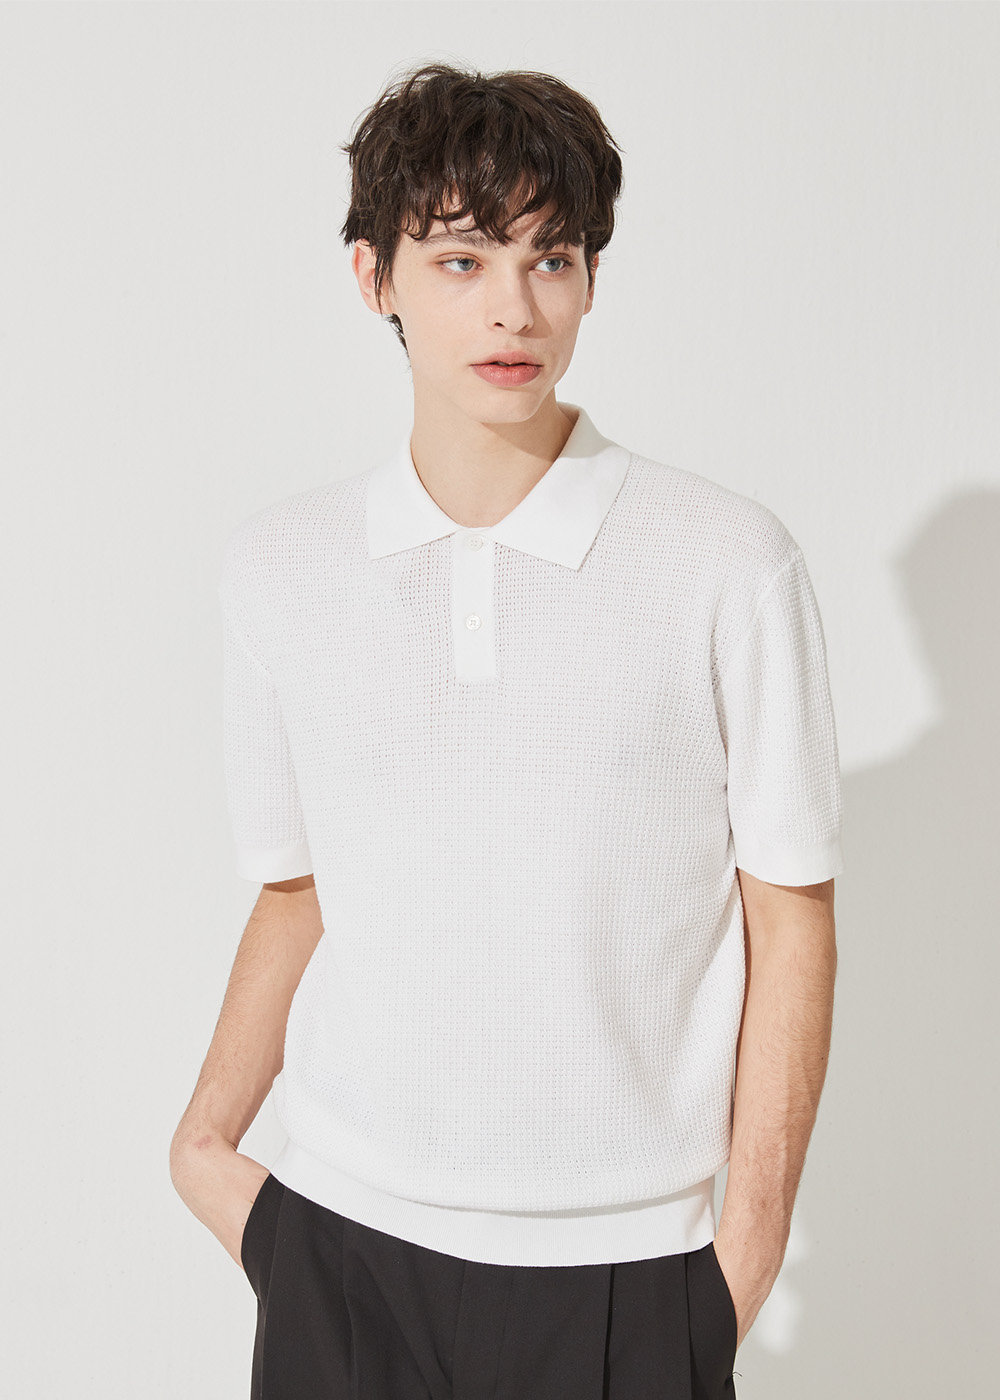 Cool cotton texture shirt  pullover (white)